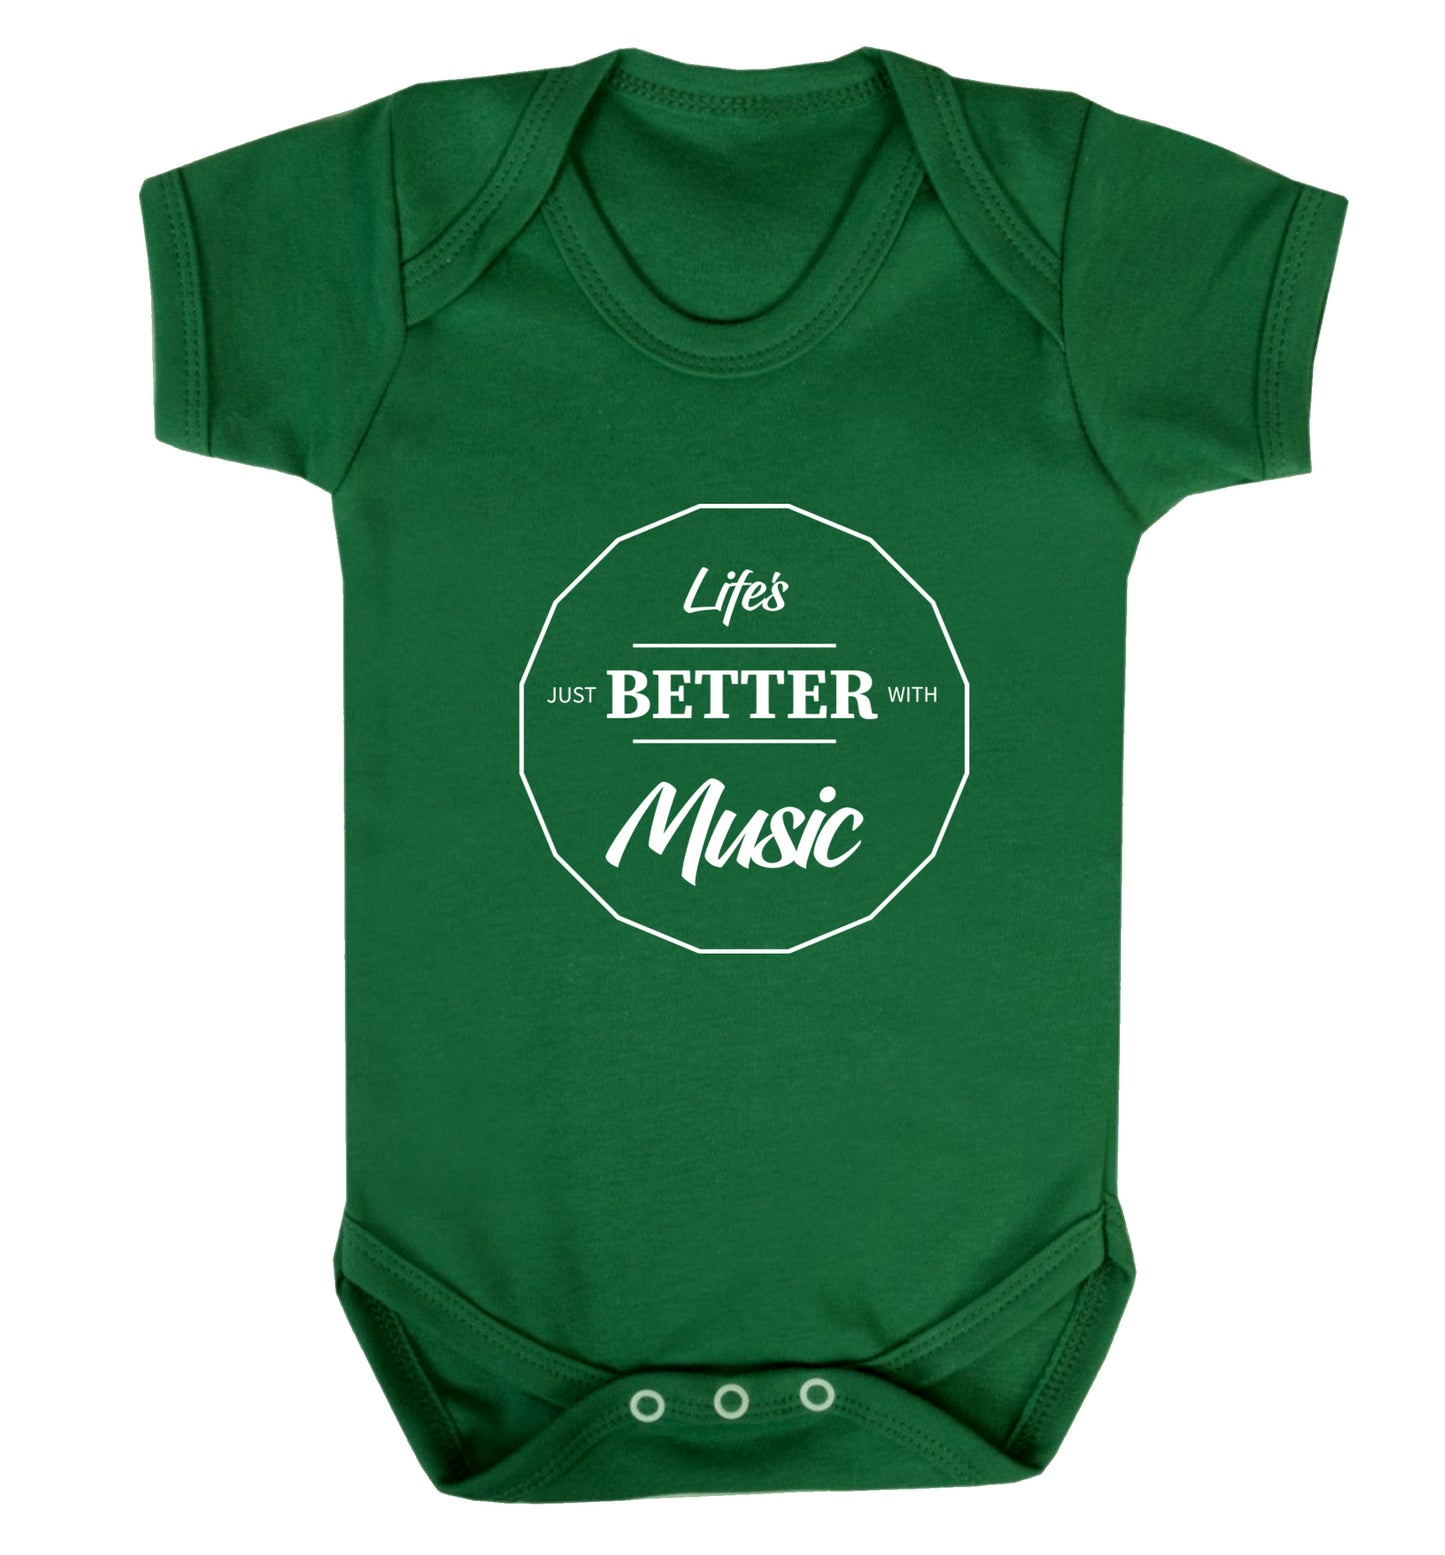 Life is Better With Music Baby Vest green 18-24 months